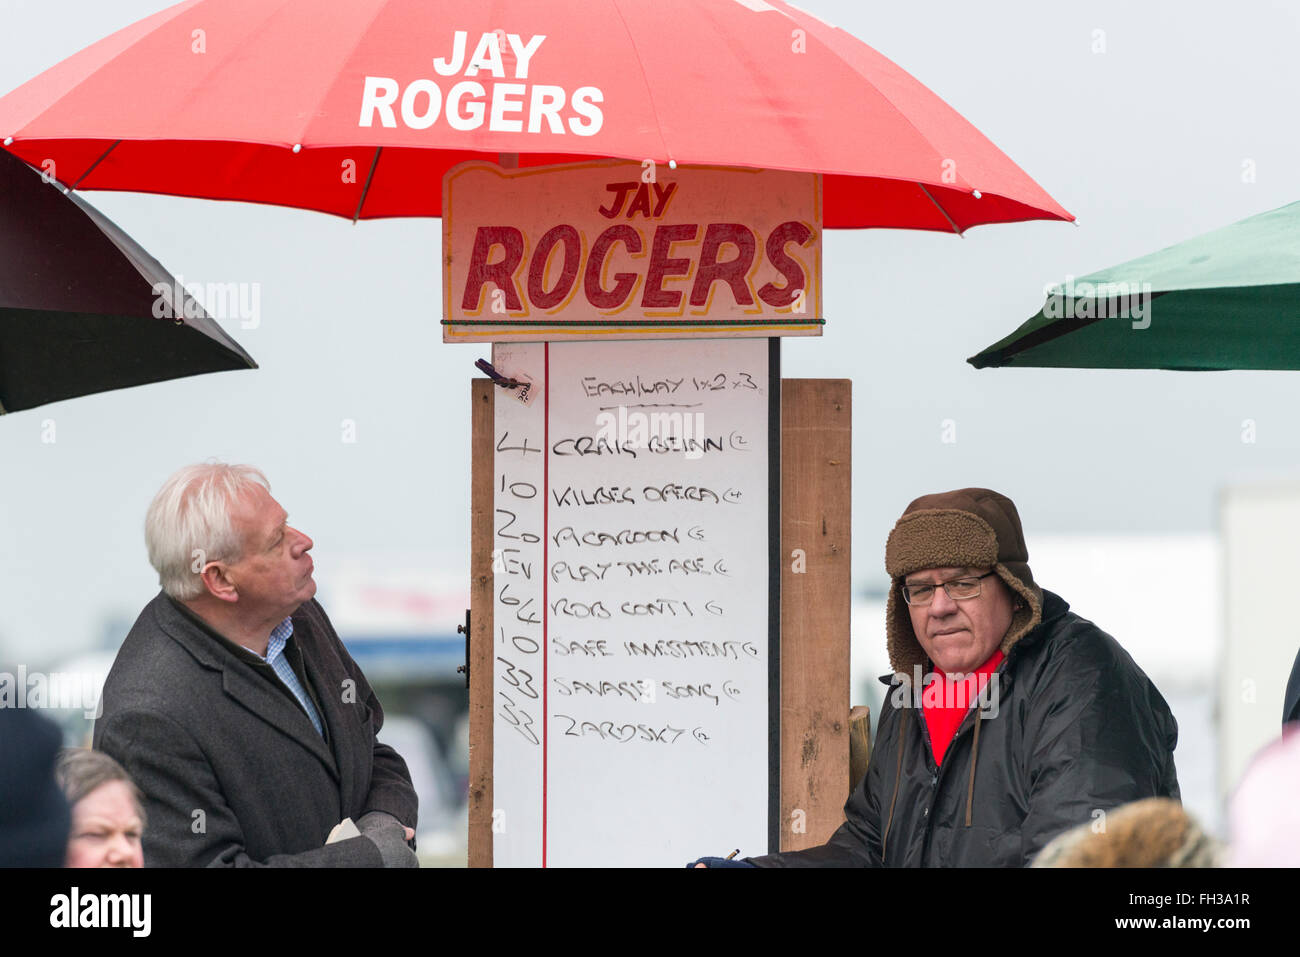 Jay Rogers bookmakers on a horse racing track Stock Photo